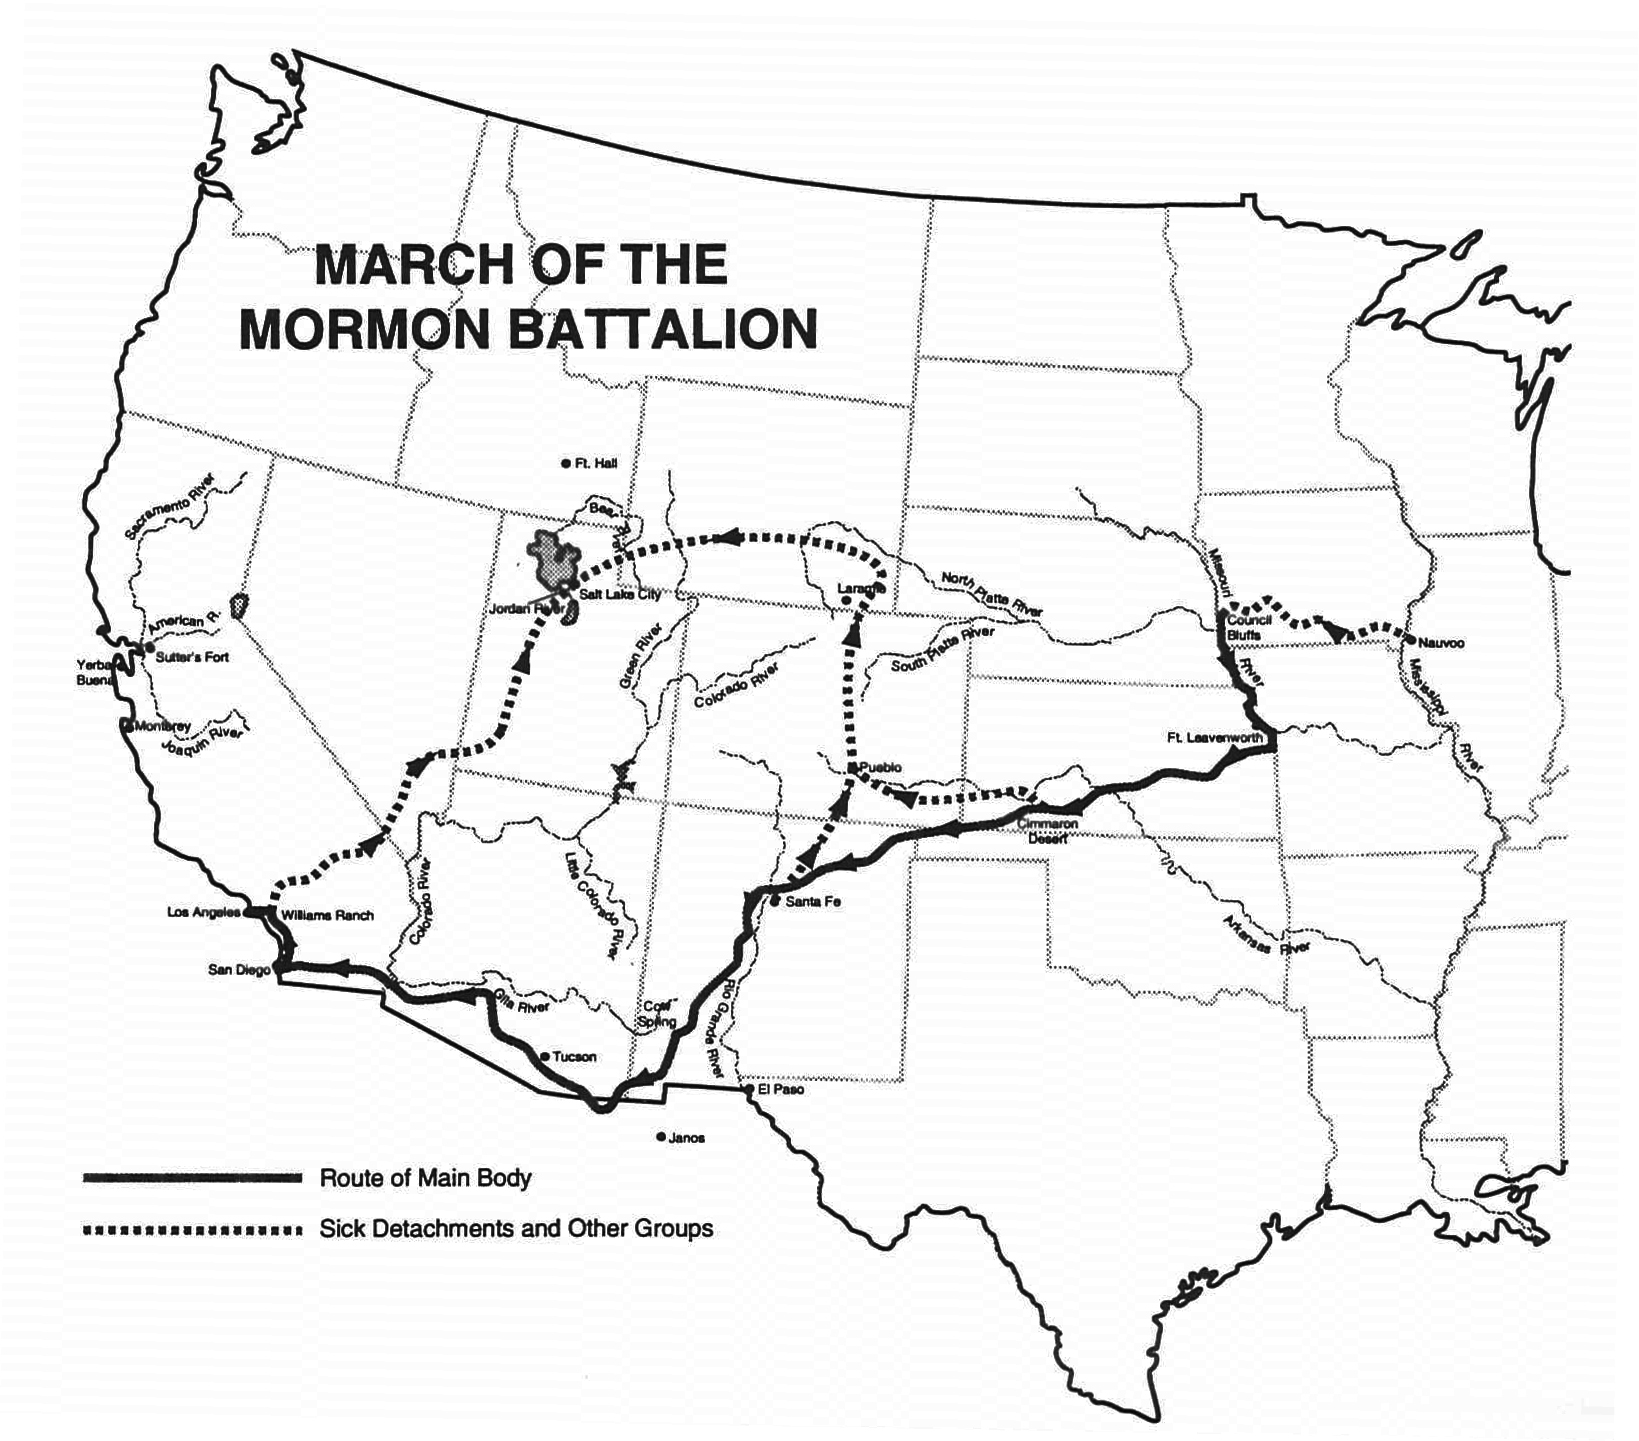 Map of the Moron Battalion march